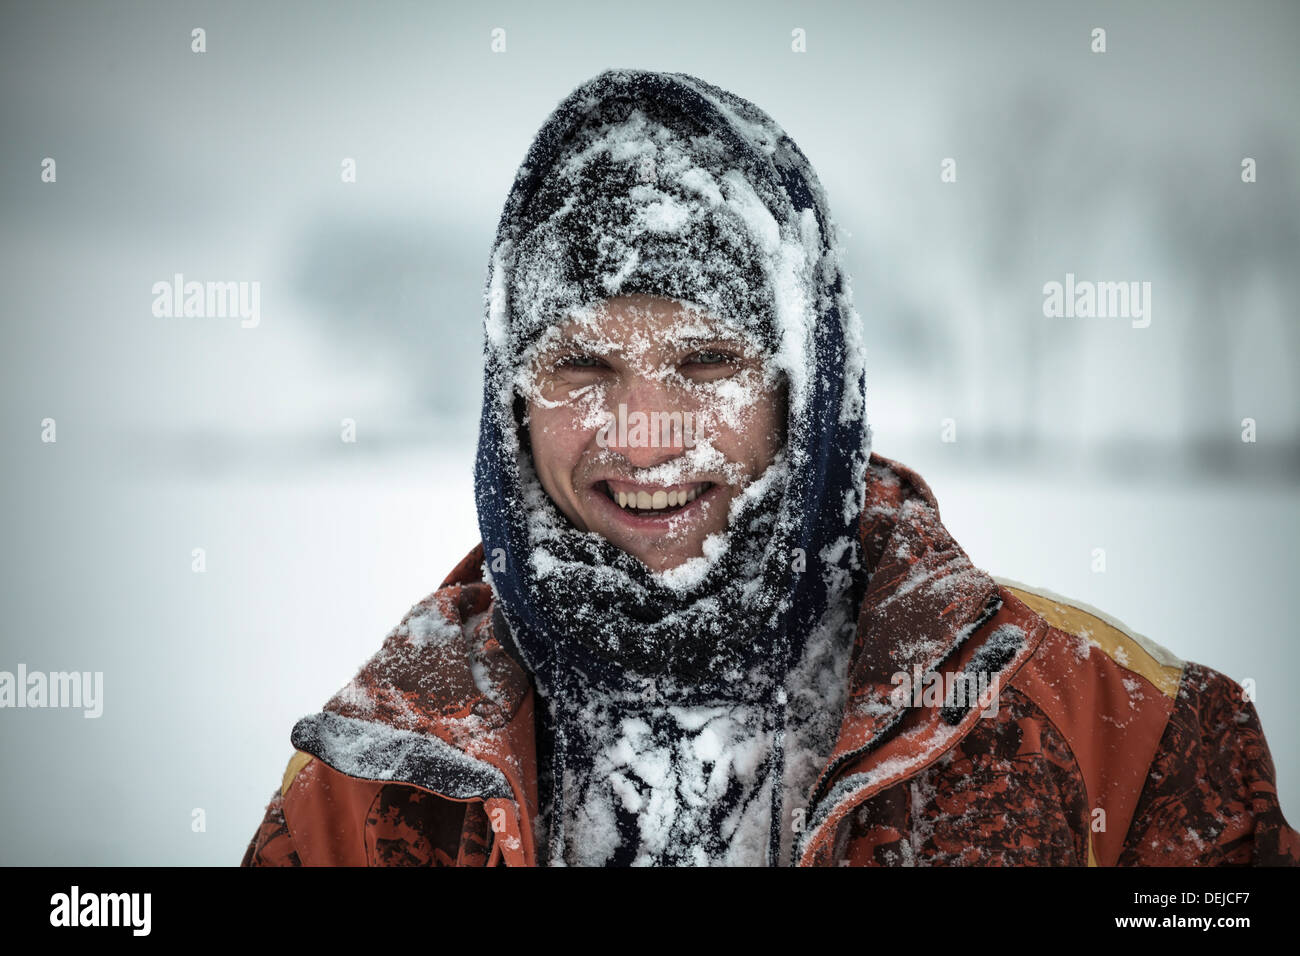 Happy man covered by snow enjoying winter. Stock Photo